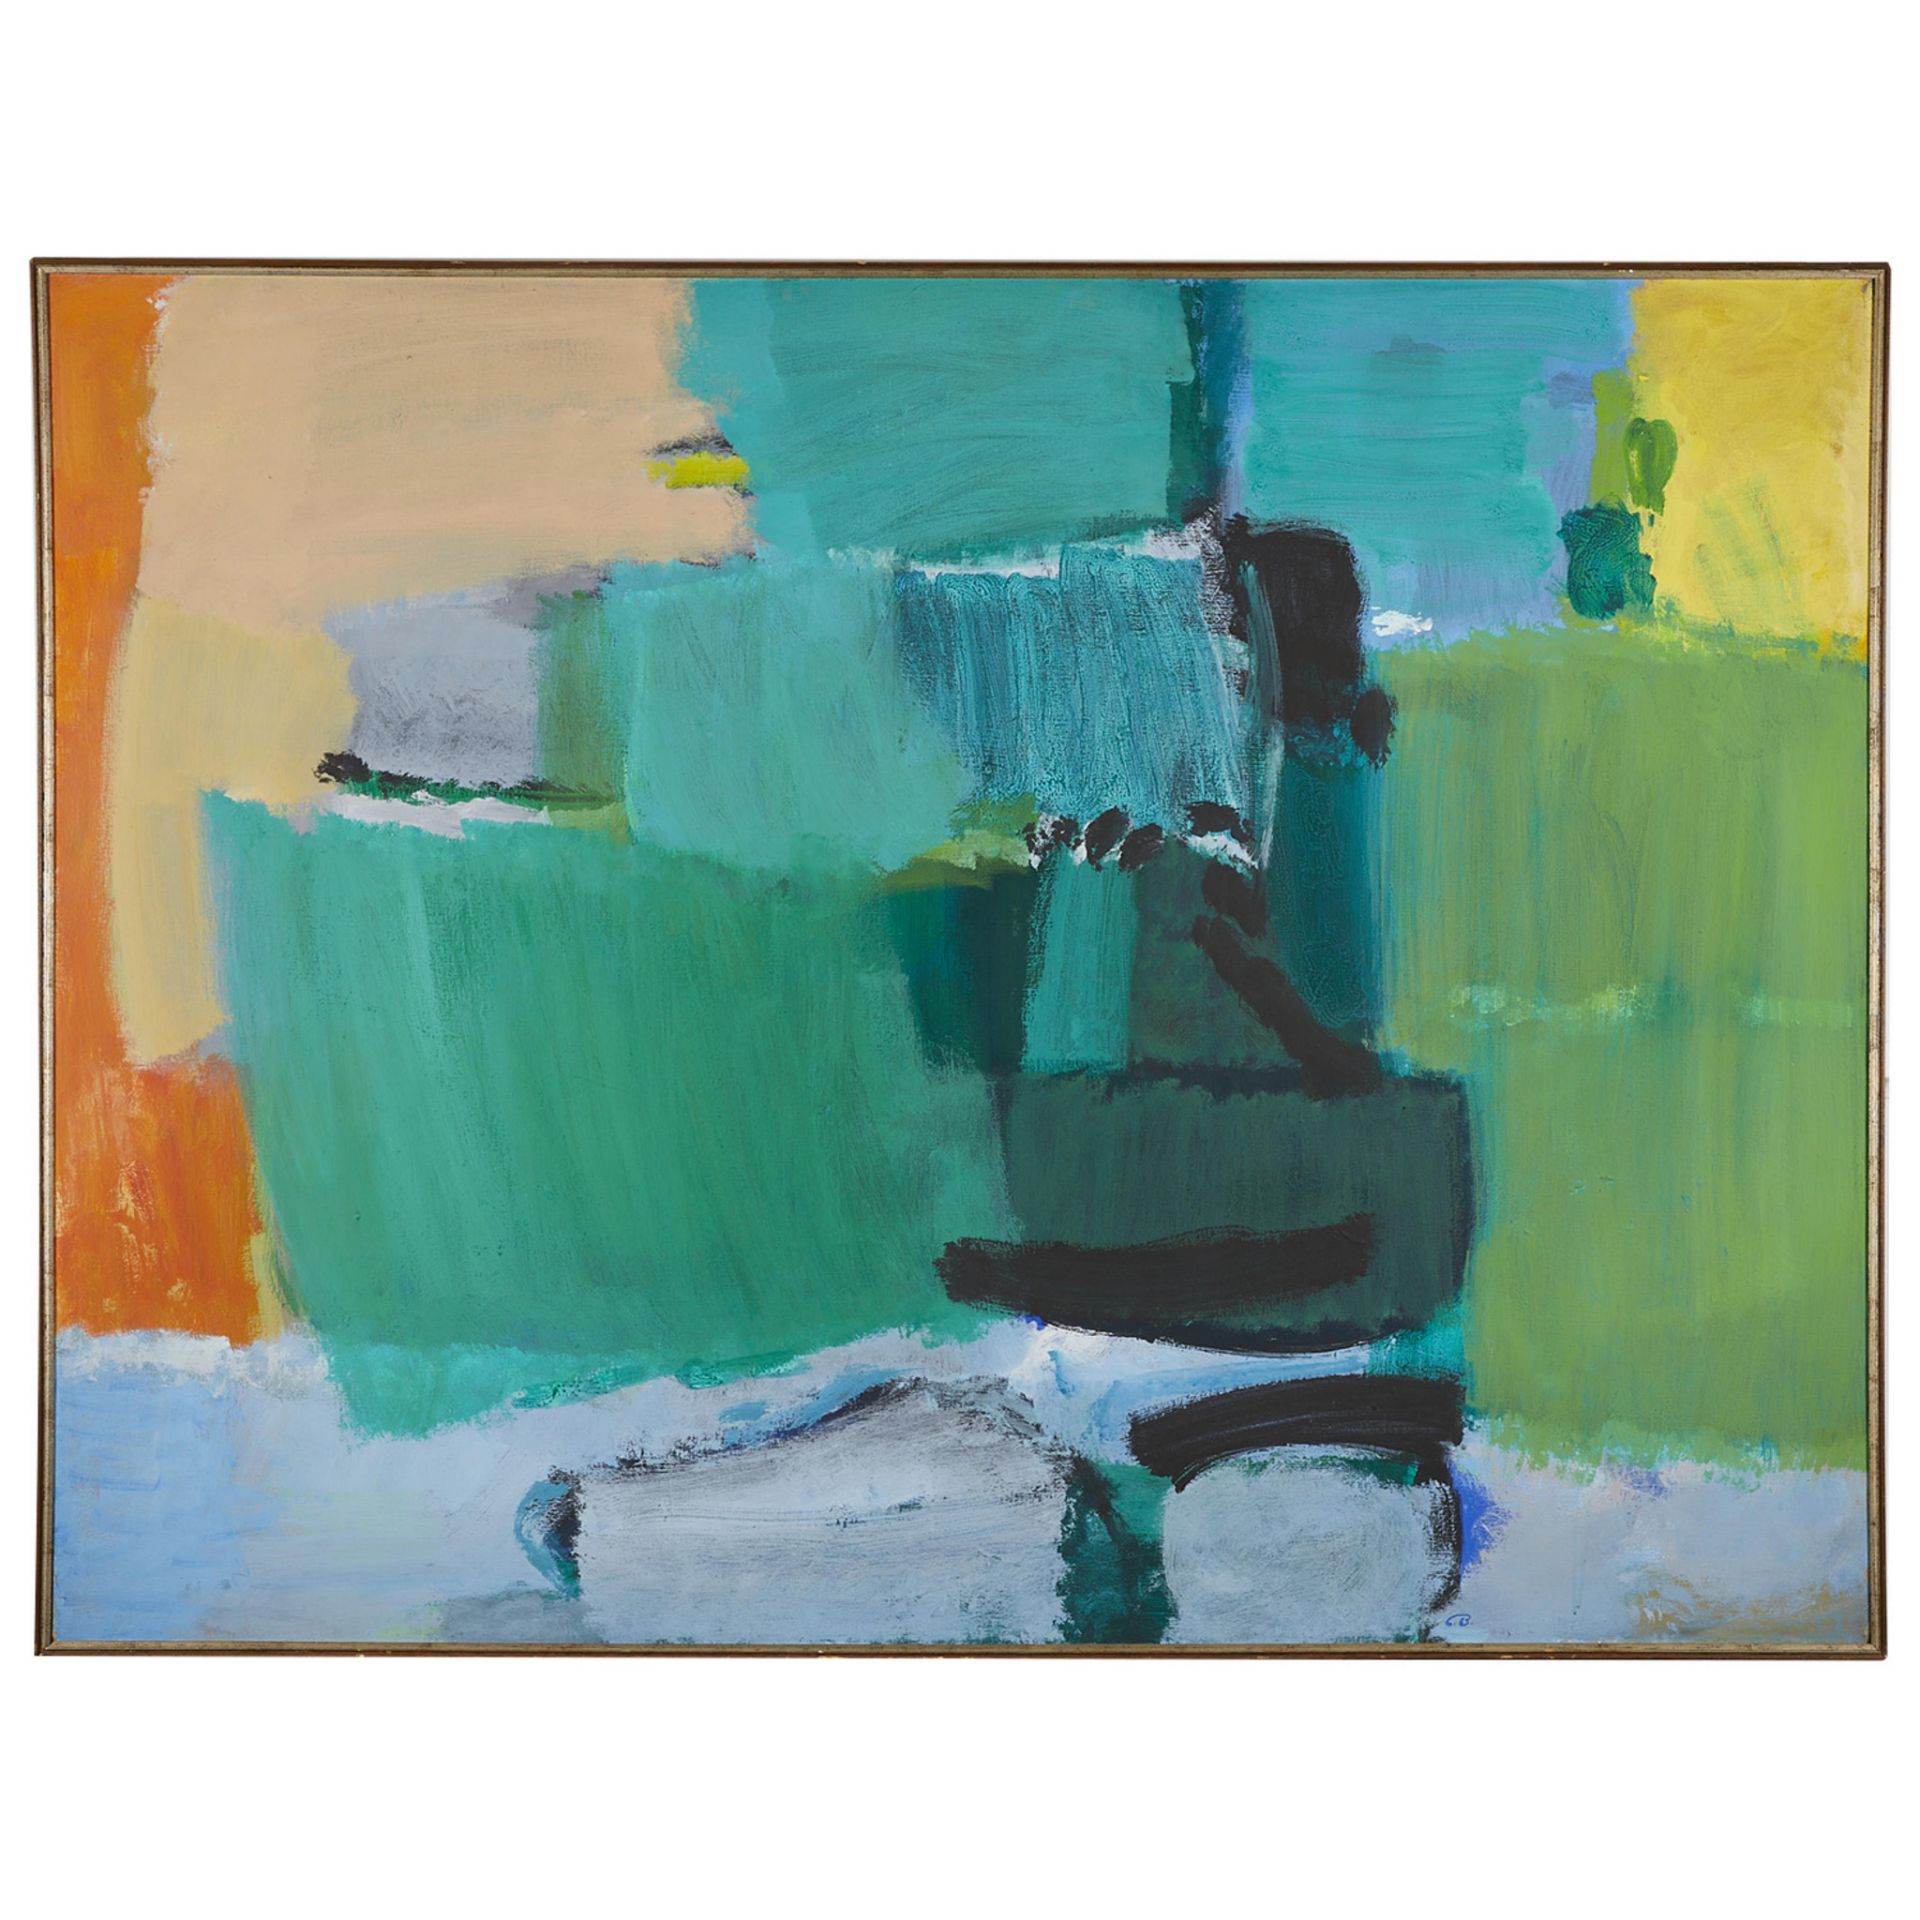 Cameron Booth "Azurite" Oil Painting 1959-62 - Image 4 of 12